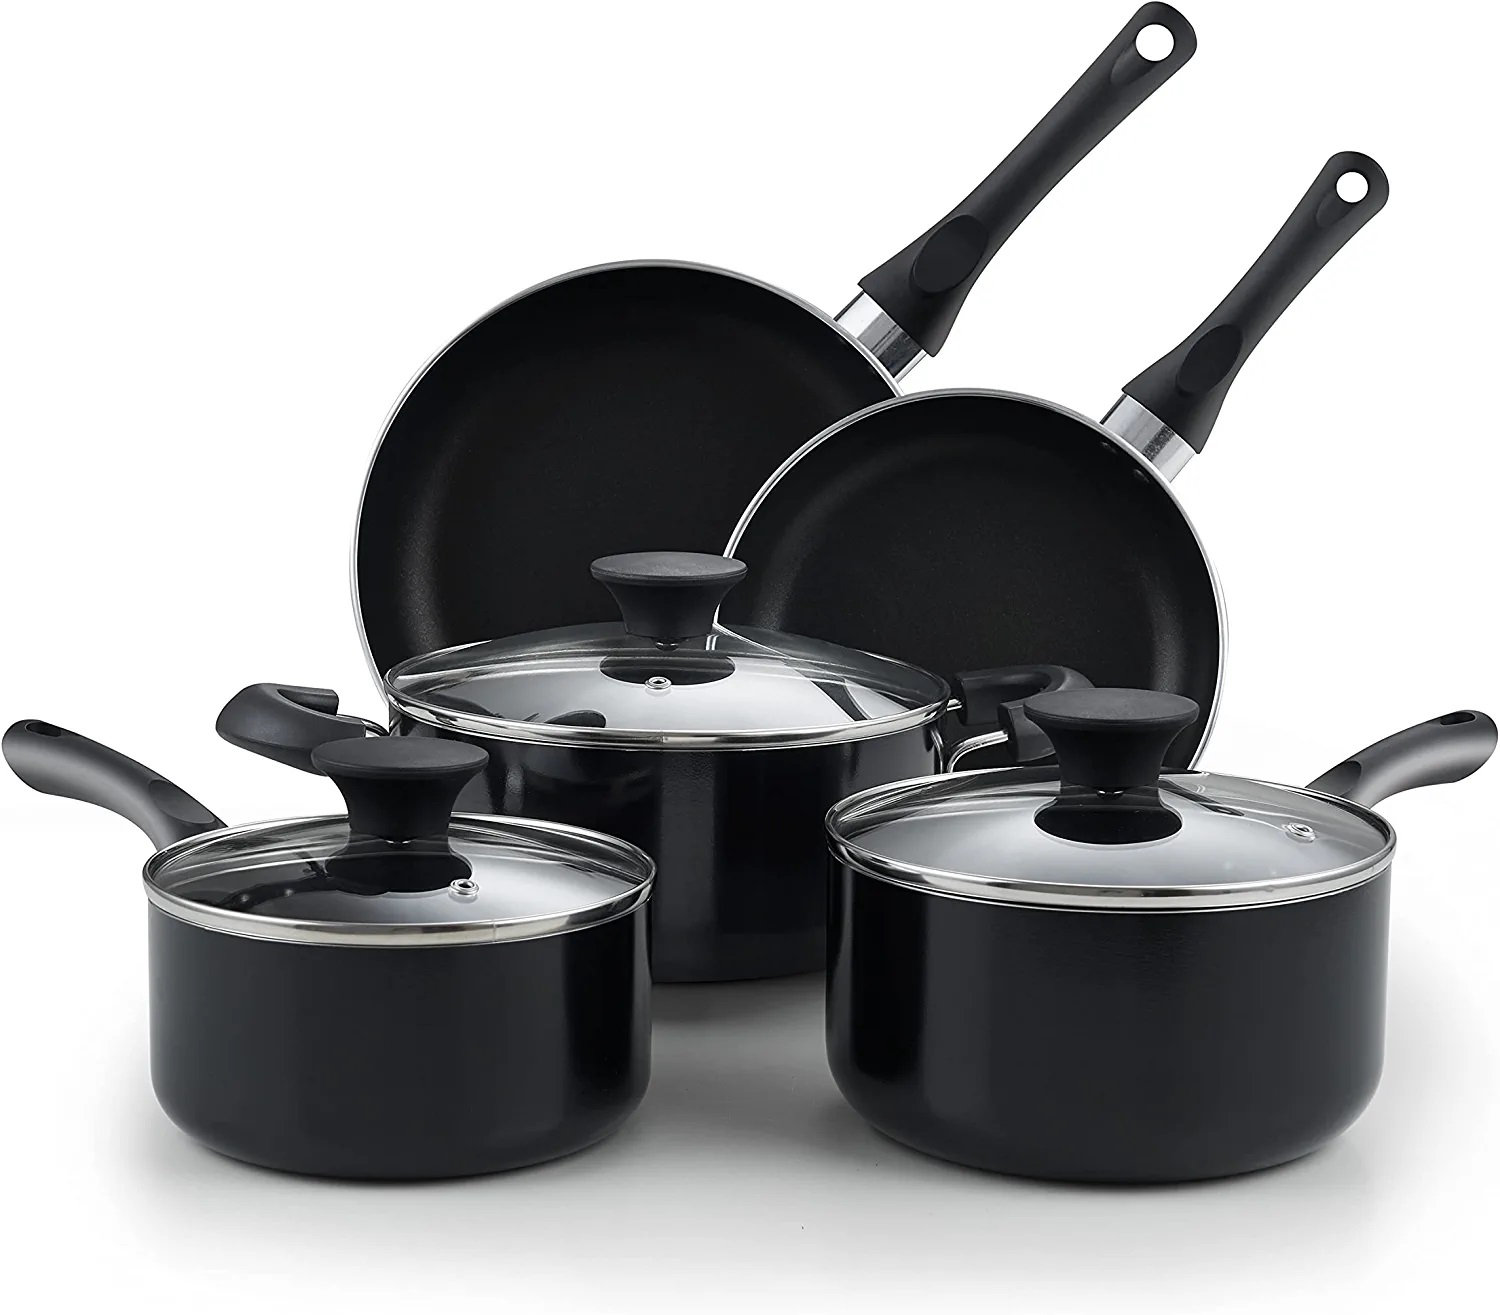 Cook N Home 10 Piece Nonstick Ceramic Coating Cookware Set, Red